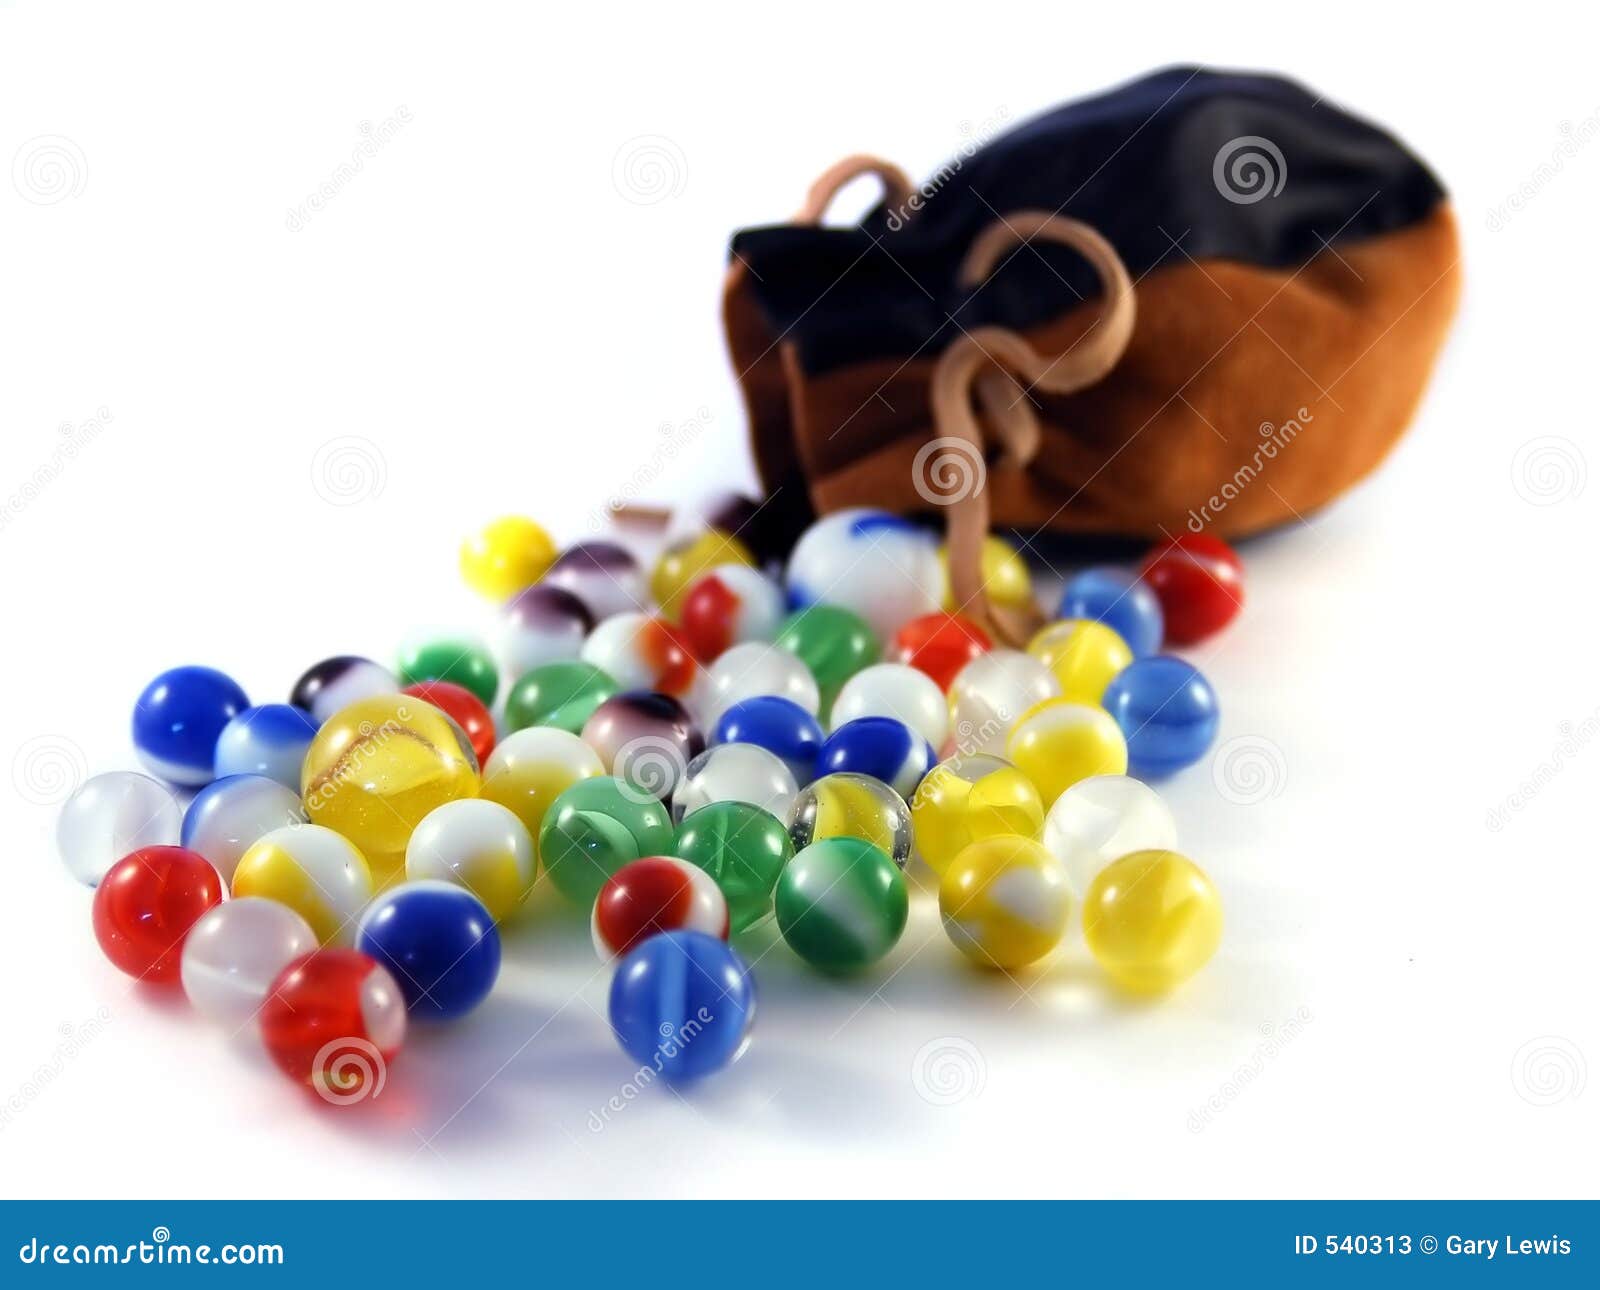 play marbles clipart - photo #33